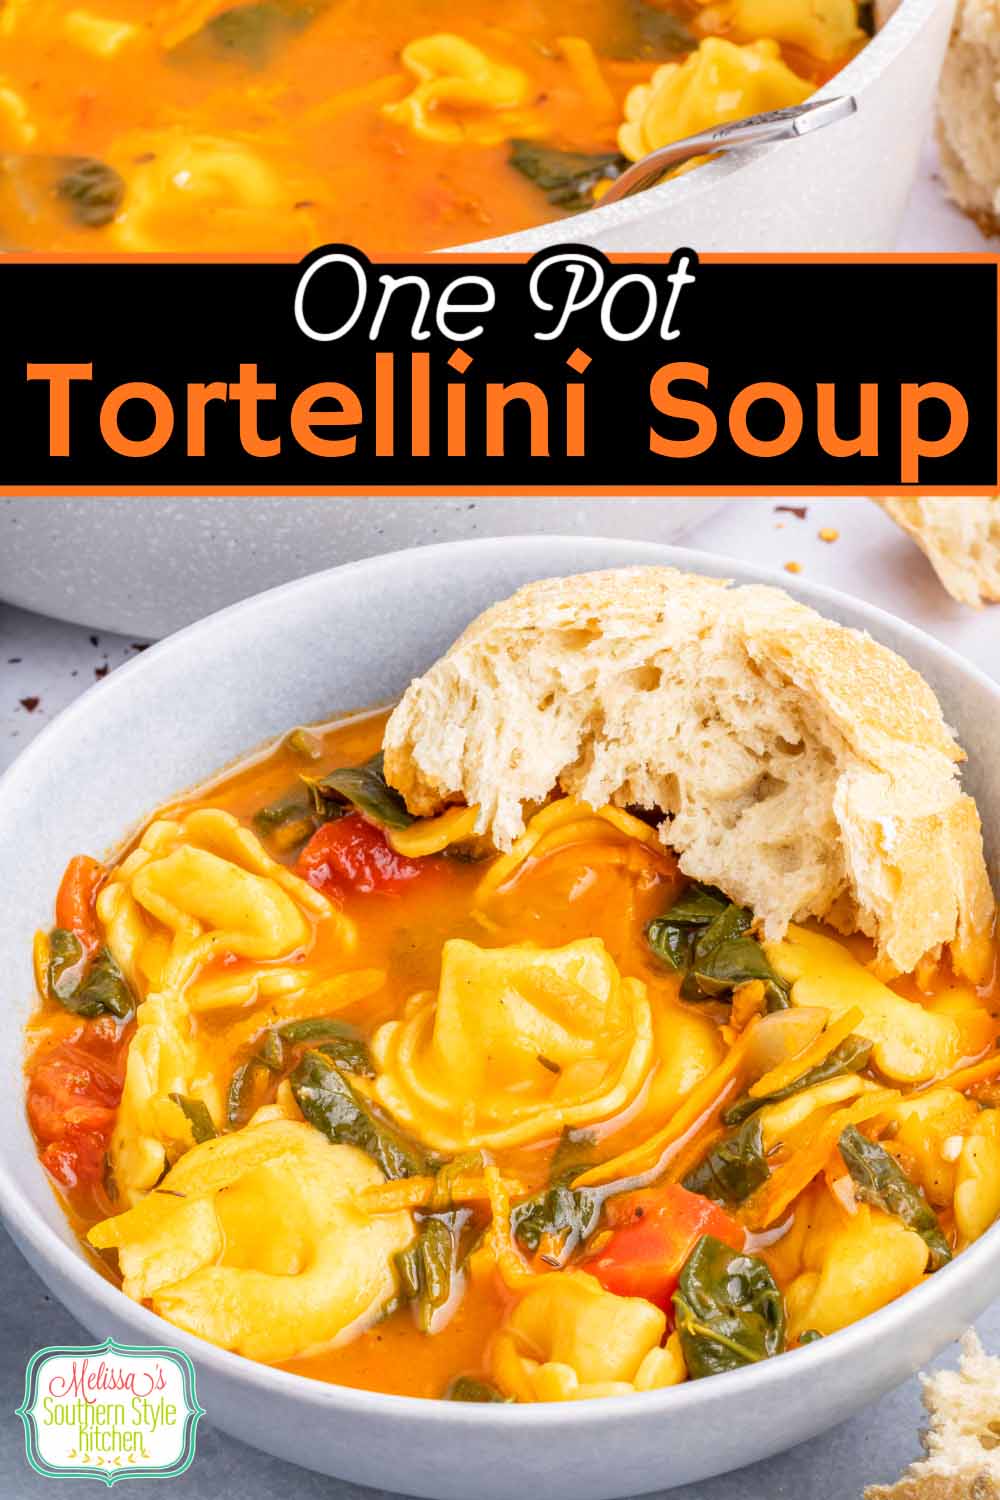 This Cheese Tortellini Soup features cheese tortellini cooked in a tasty tomato infused broth with onions, sweet carrots and baby spinach. #tortellinisoup #cheesetortellini #easysouprecipes #soup #souprecipes #Italiansoup via @melissasssk